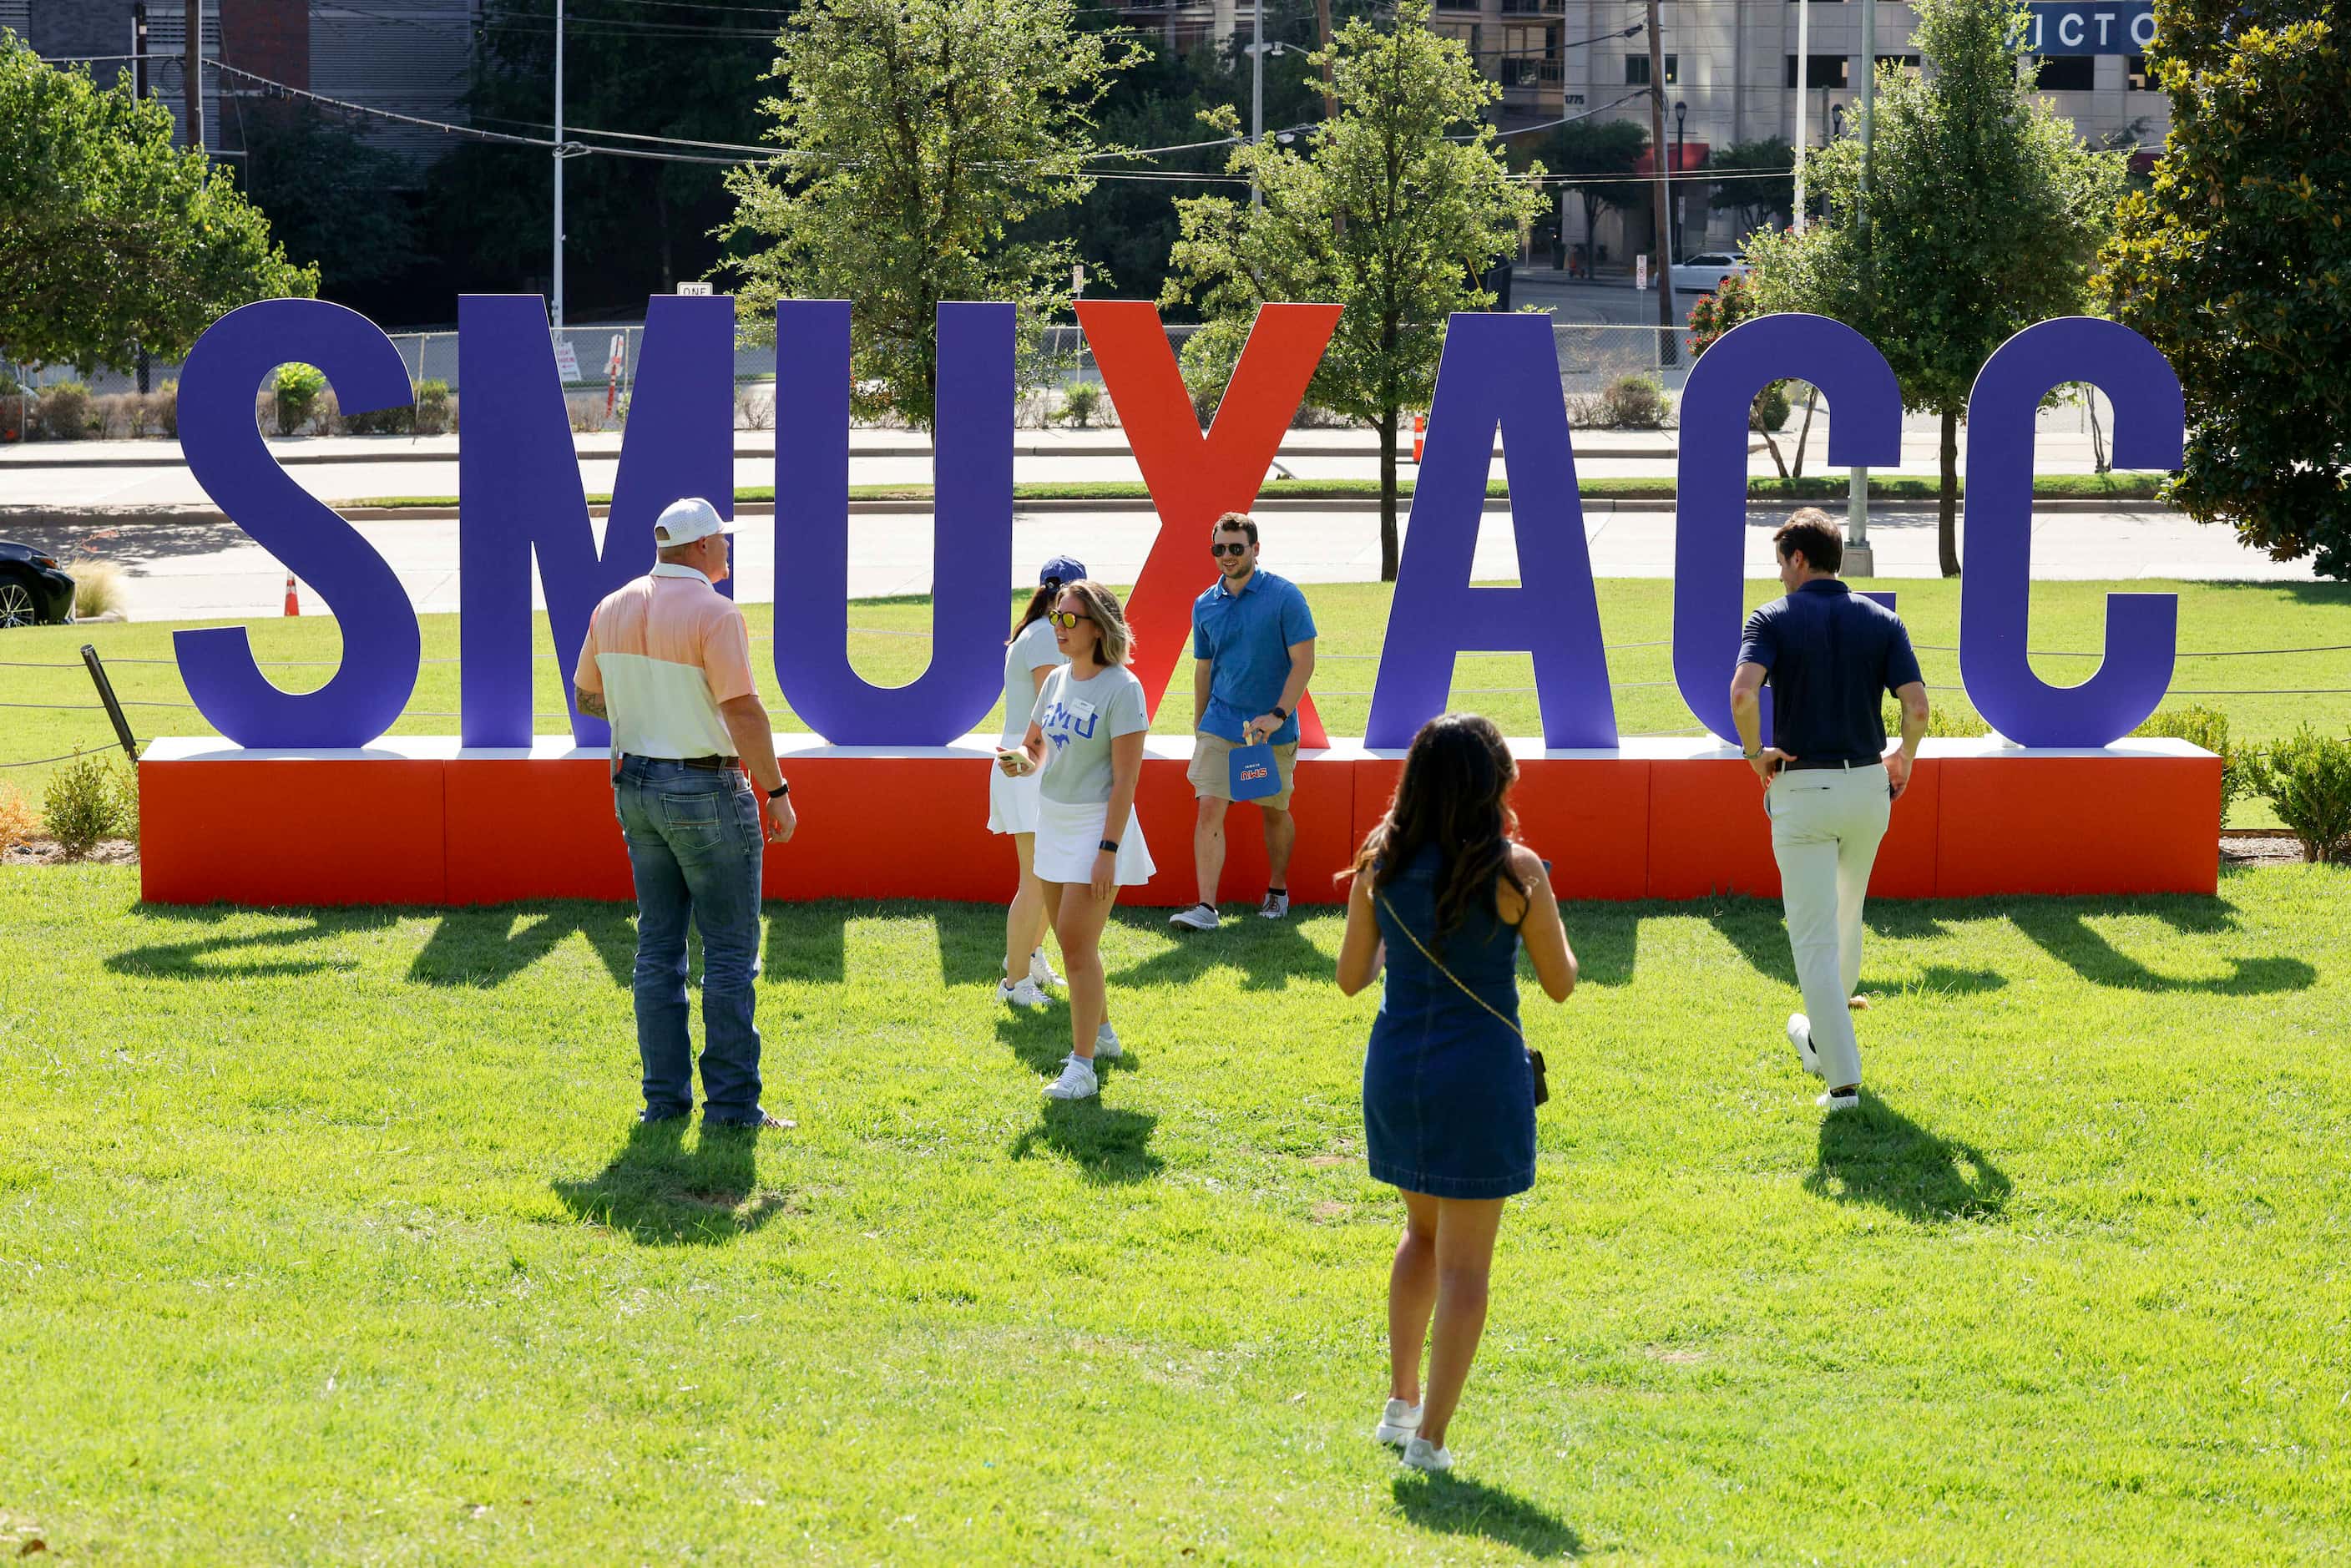 People take photos in front of a SMU and ACC sign during a celebration of SMU’s first day in...